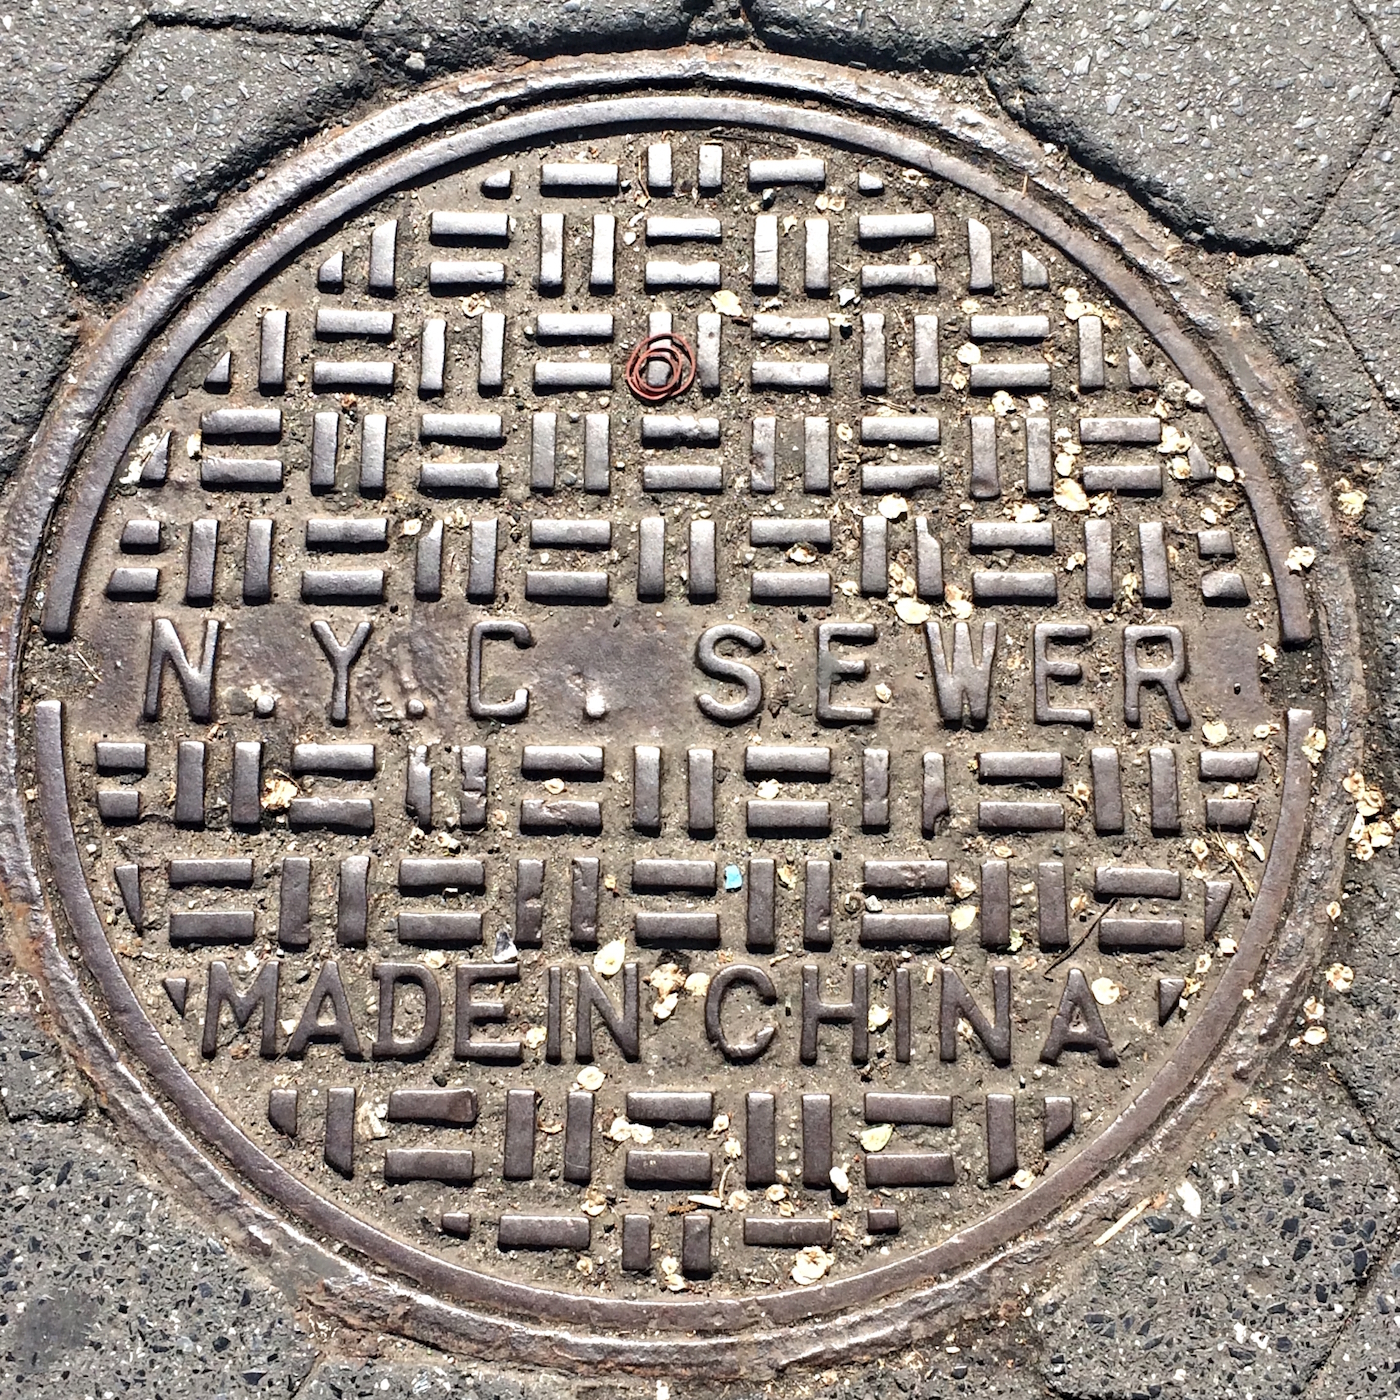 A Eulogy for One of NYC's Oldest Manhole Covers